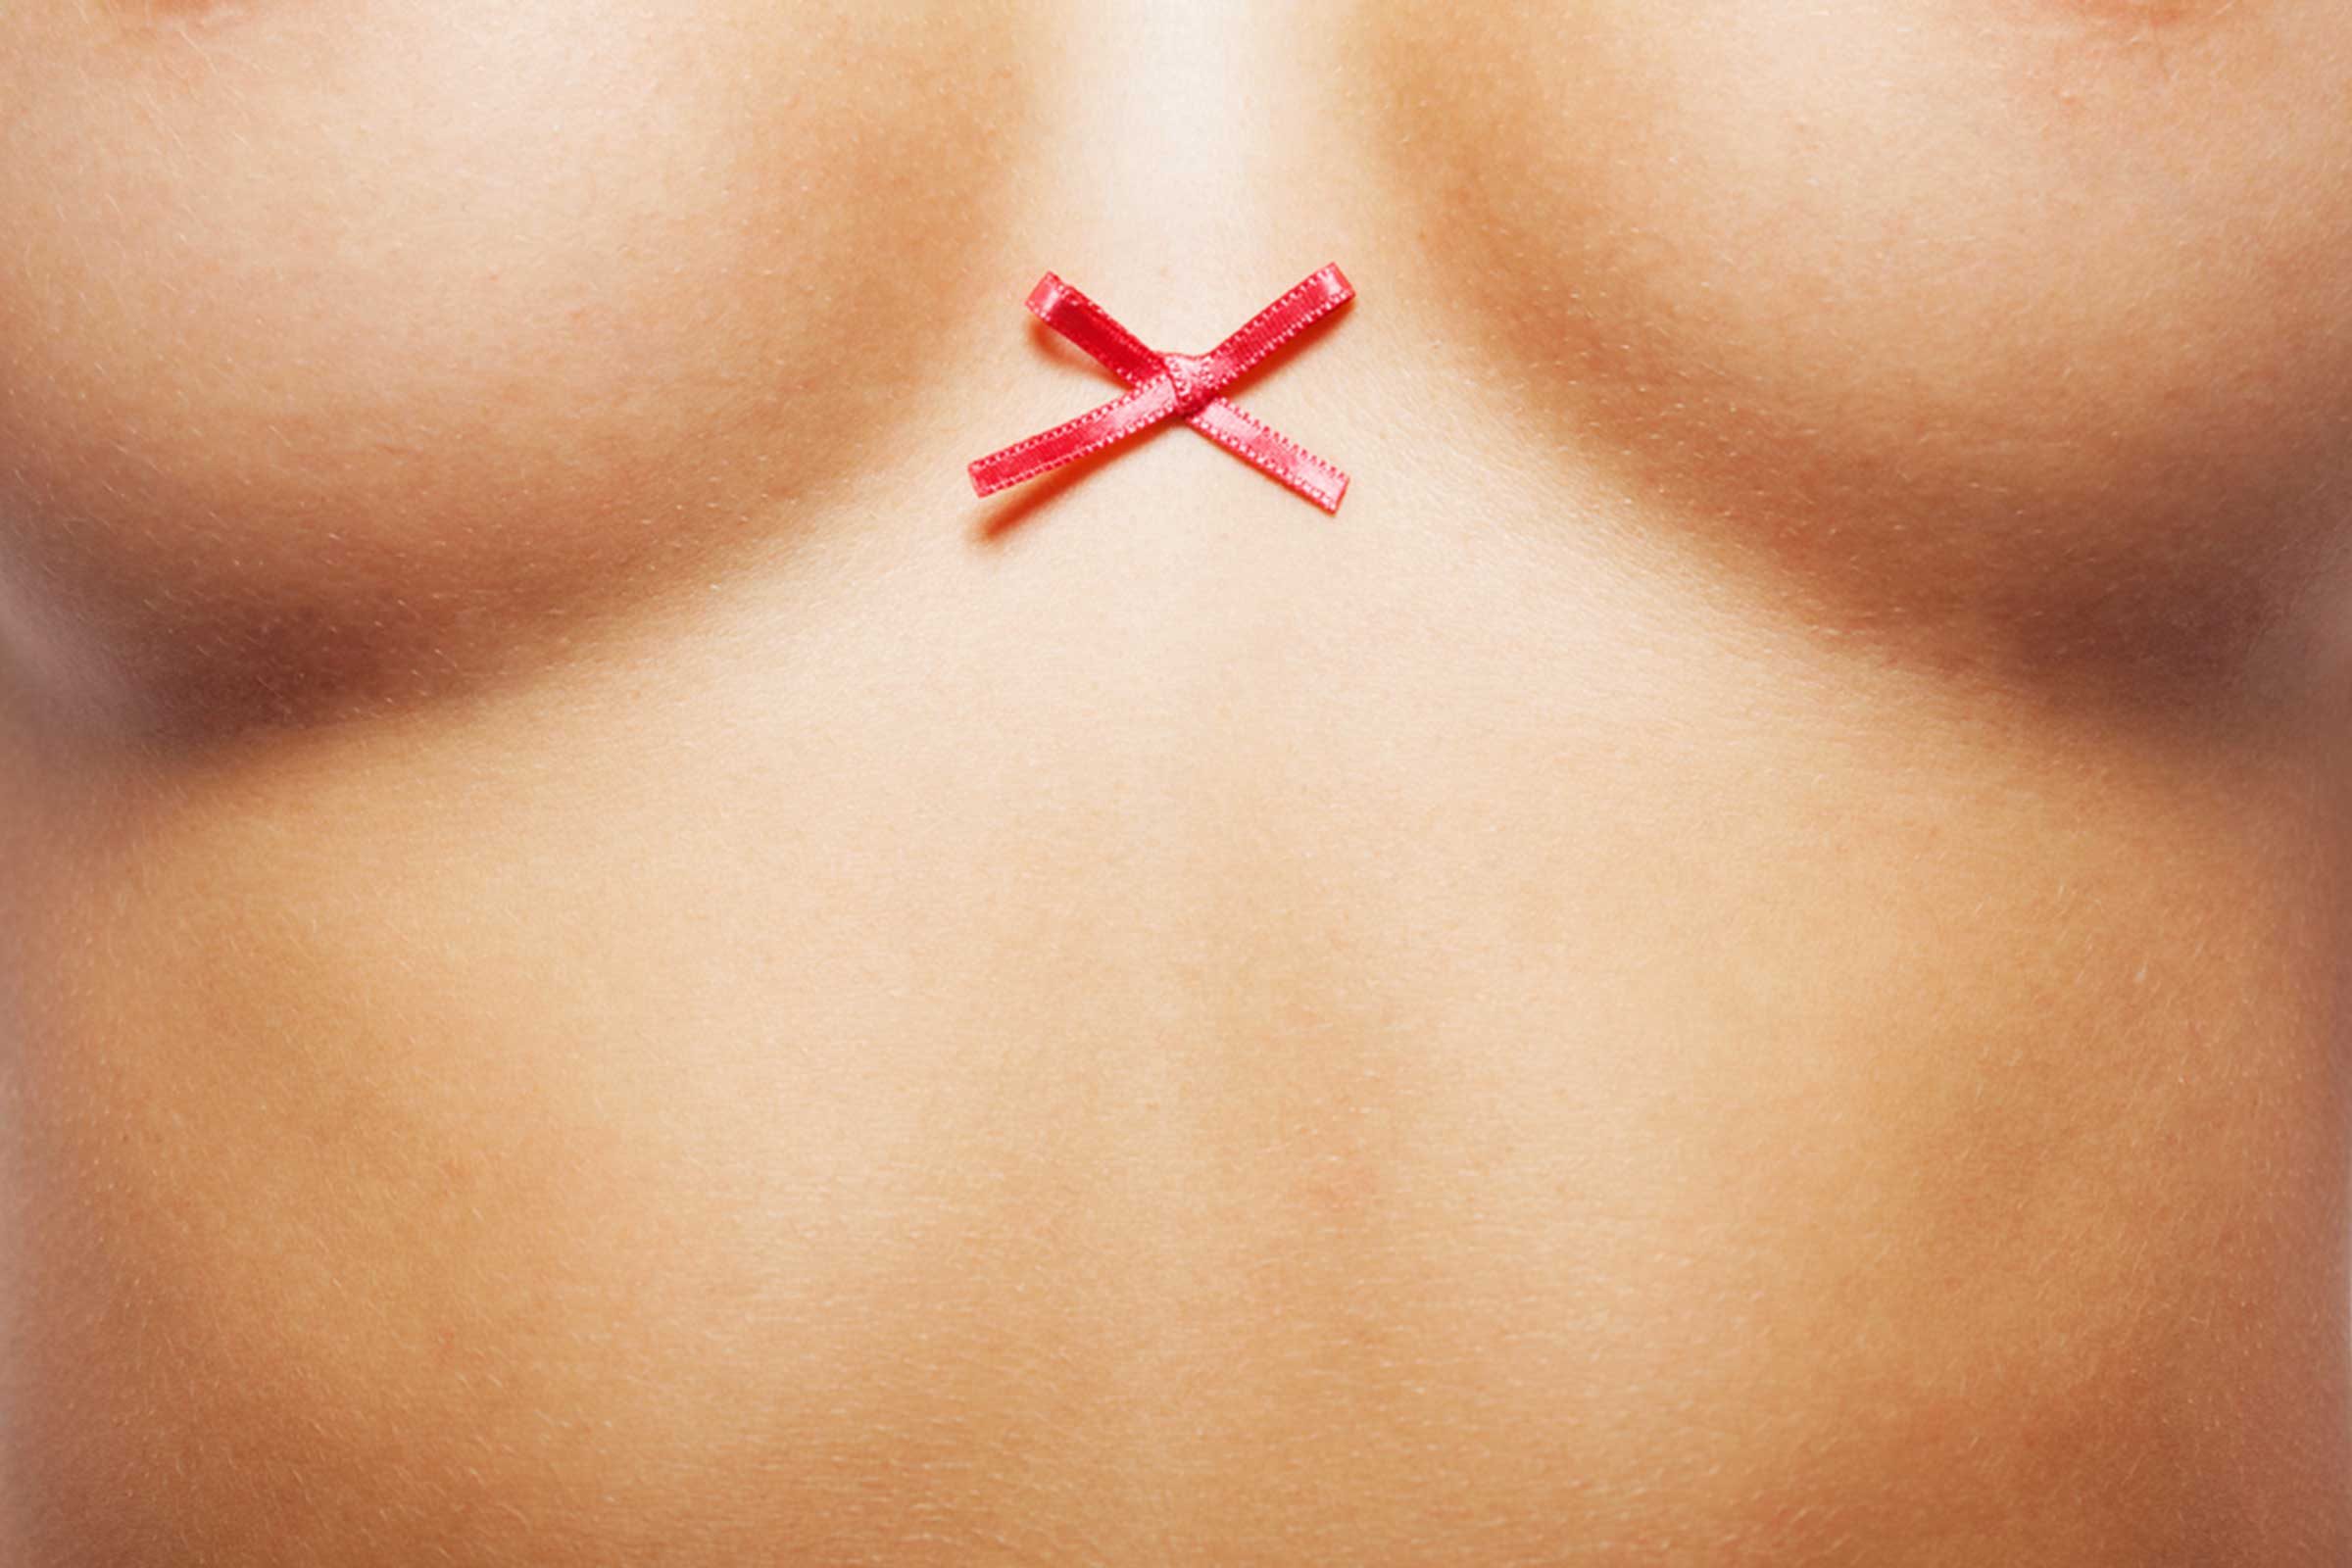 5 Breast Cancer Myths You Hear All the Time That Just Aren't True